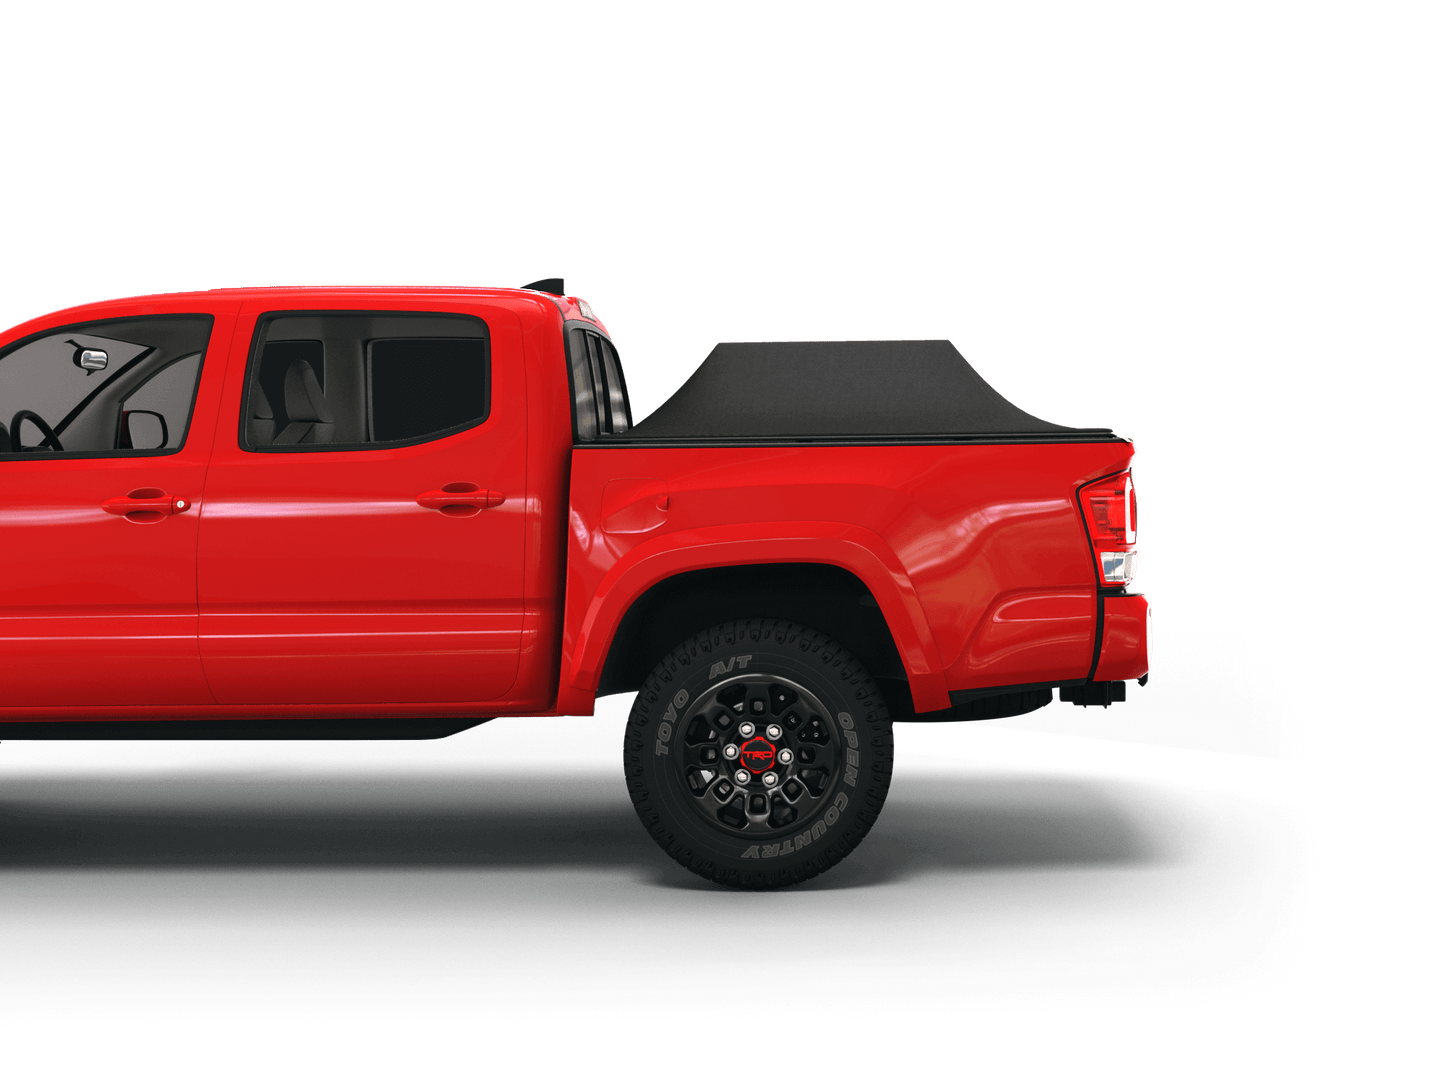 Red Toyota Tacoma with Sawtooth Stretch tonneau cover expanded over cargo load